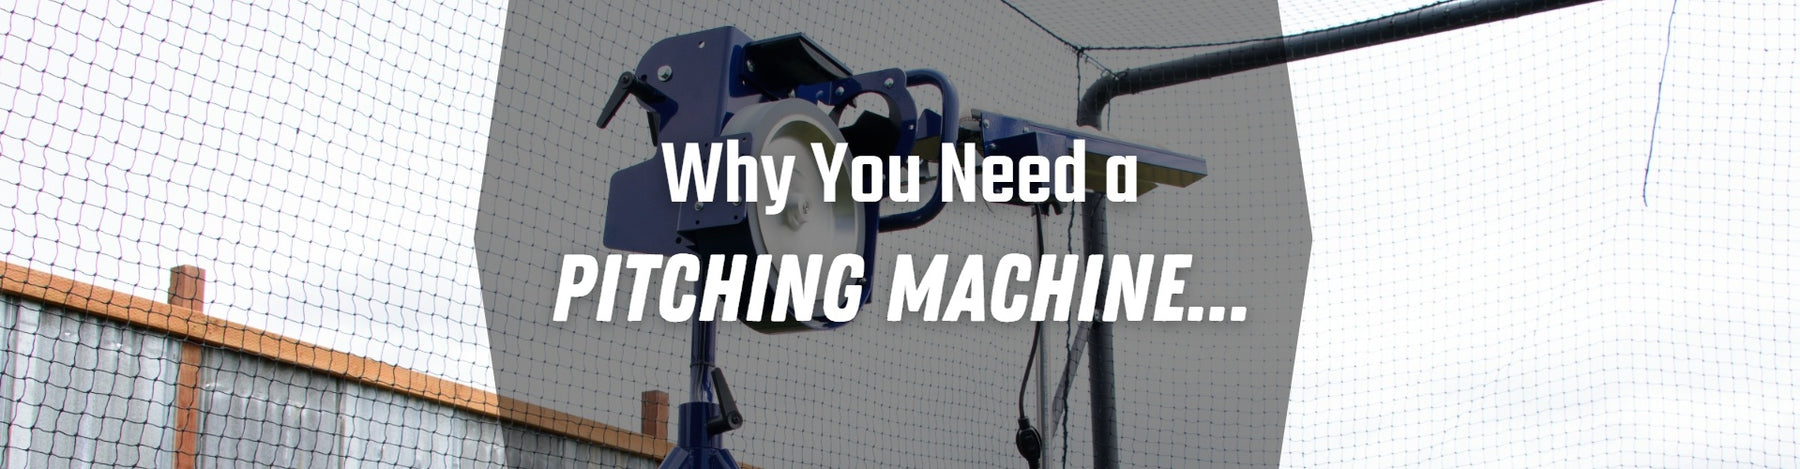 Why You Need a Pitching Machine...